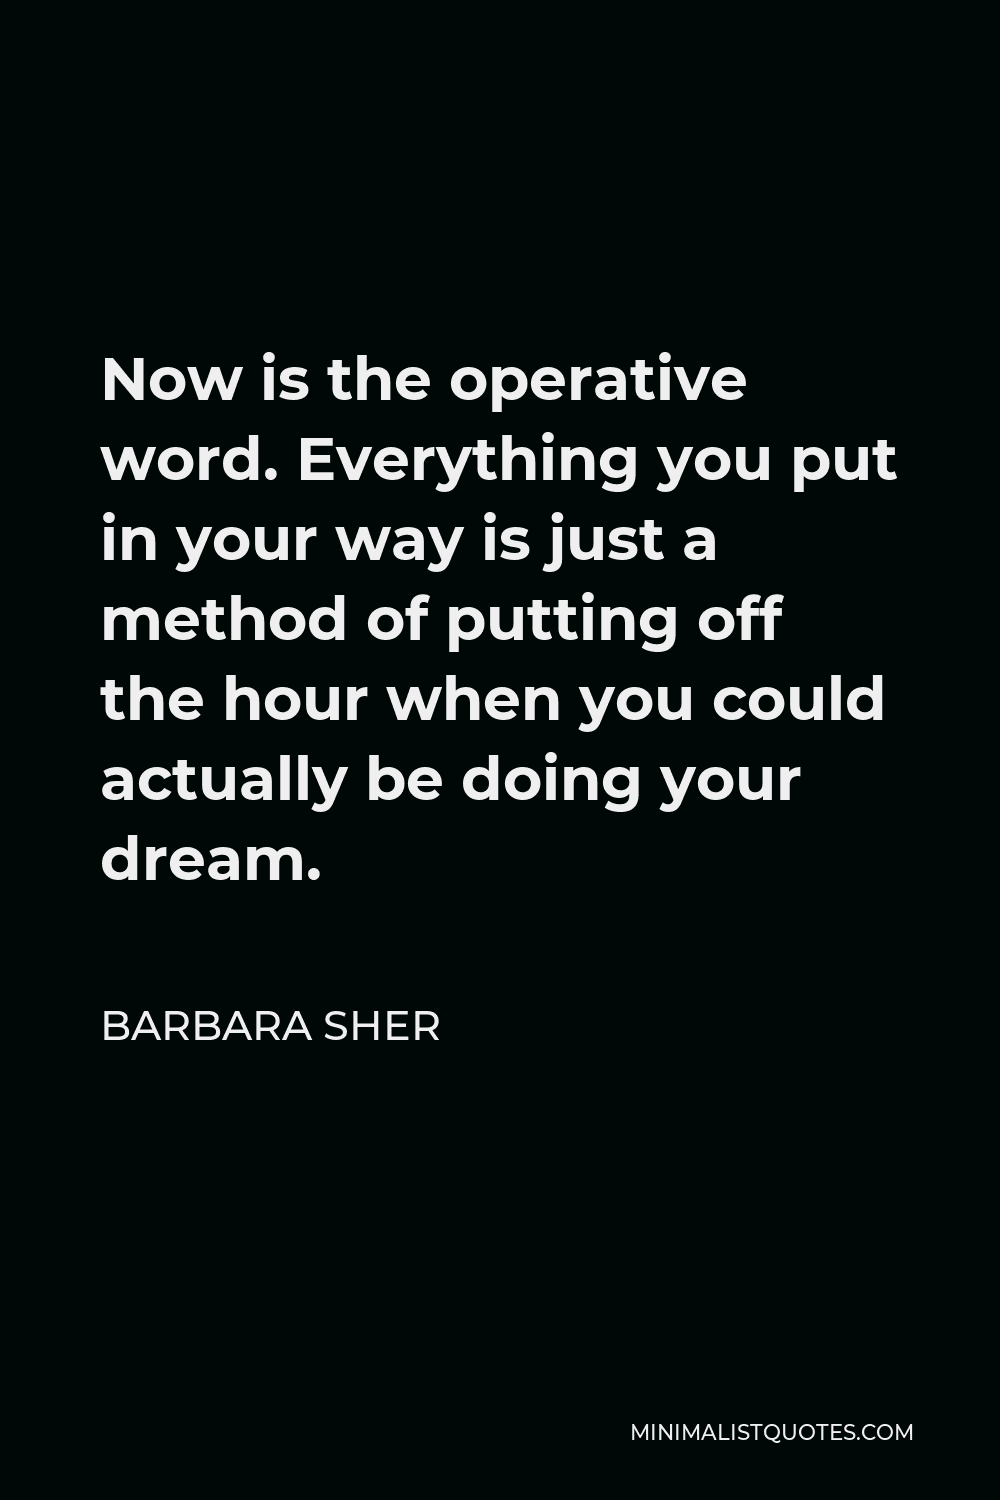 Barbara Sher Quote - Now is the operative word. Everything you put in your way is just a method of putting off the hour when you could actually be doing your dream.